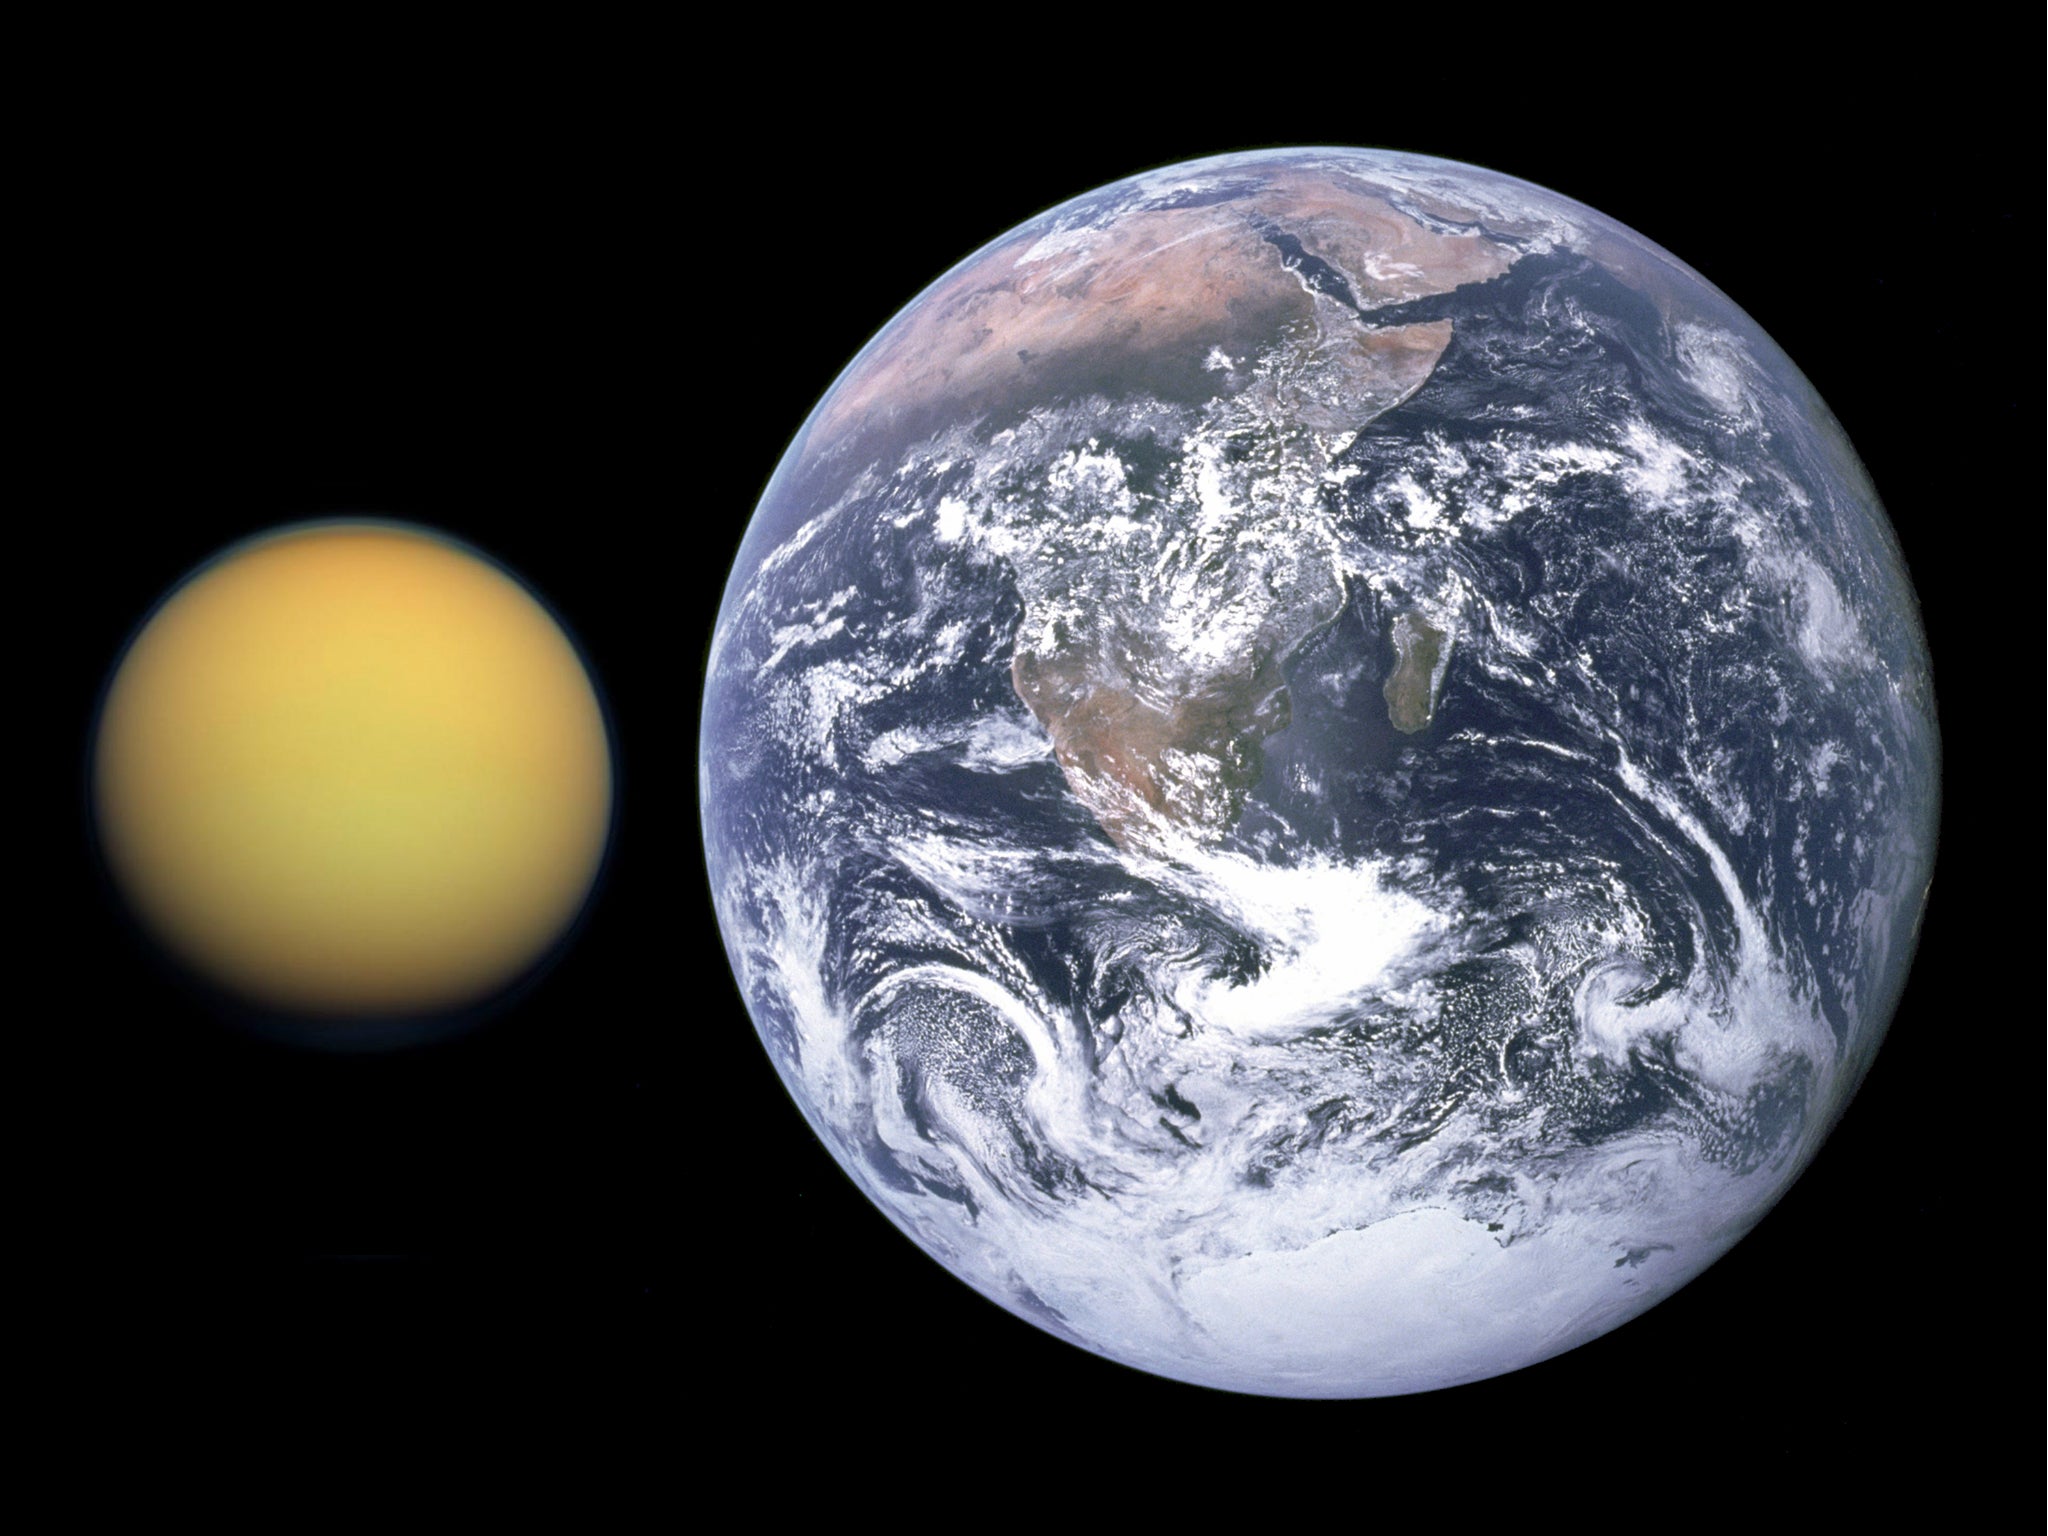 Saturn’s moon Titan, as it compares in size to Earth. Both Titan and Earth were used by researchers to train a neural network to recognize whether exoplanets hold the potential for alien life.